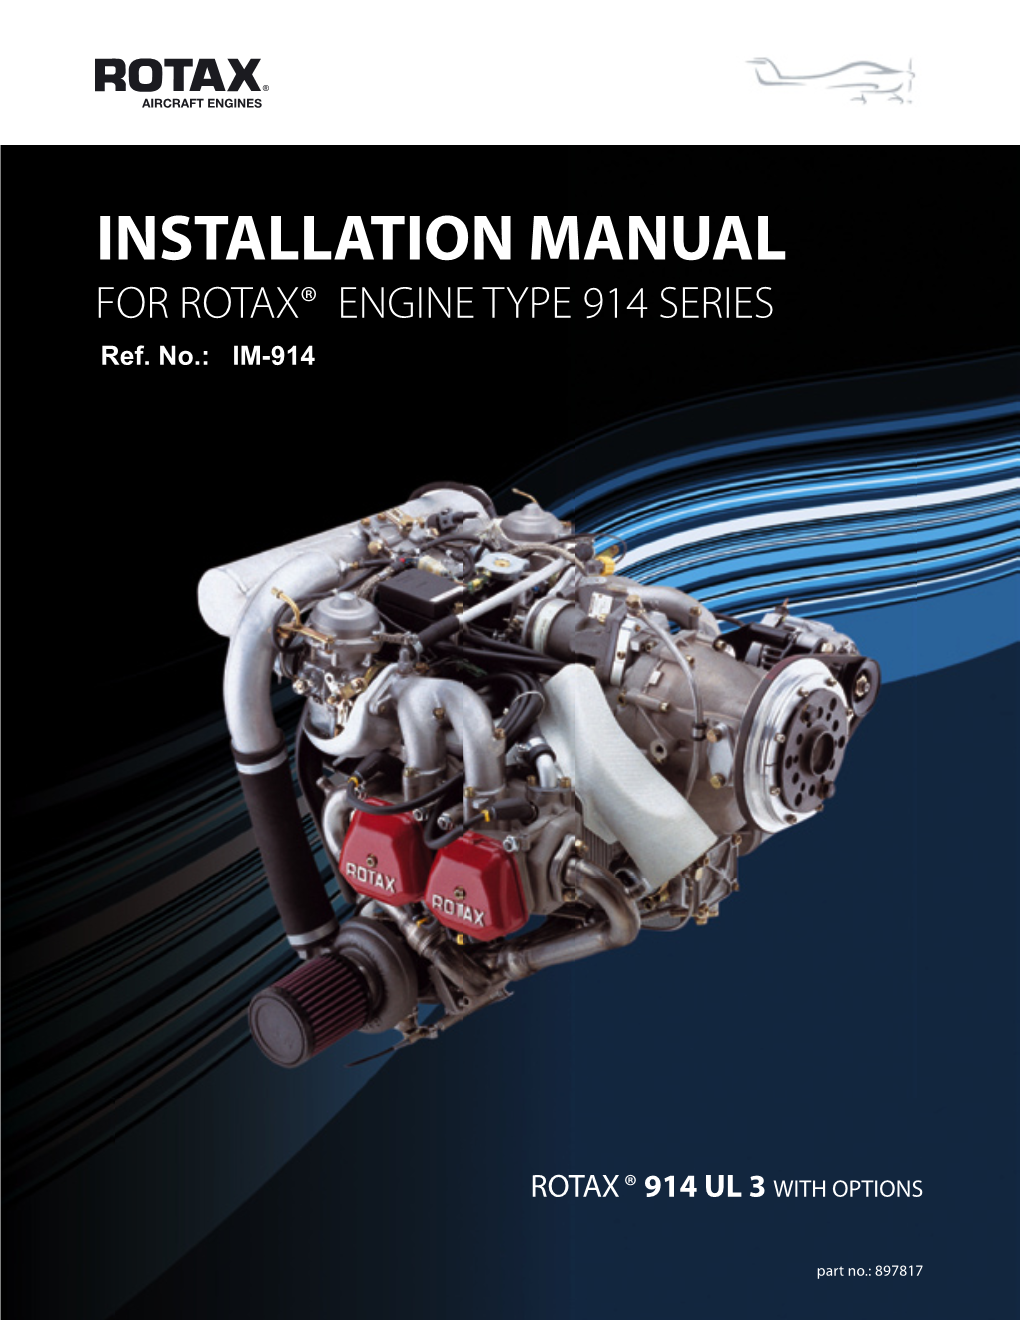 Installation Manual for Rotax® Engine Type 914 Series